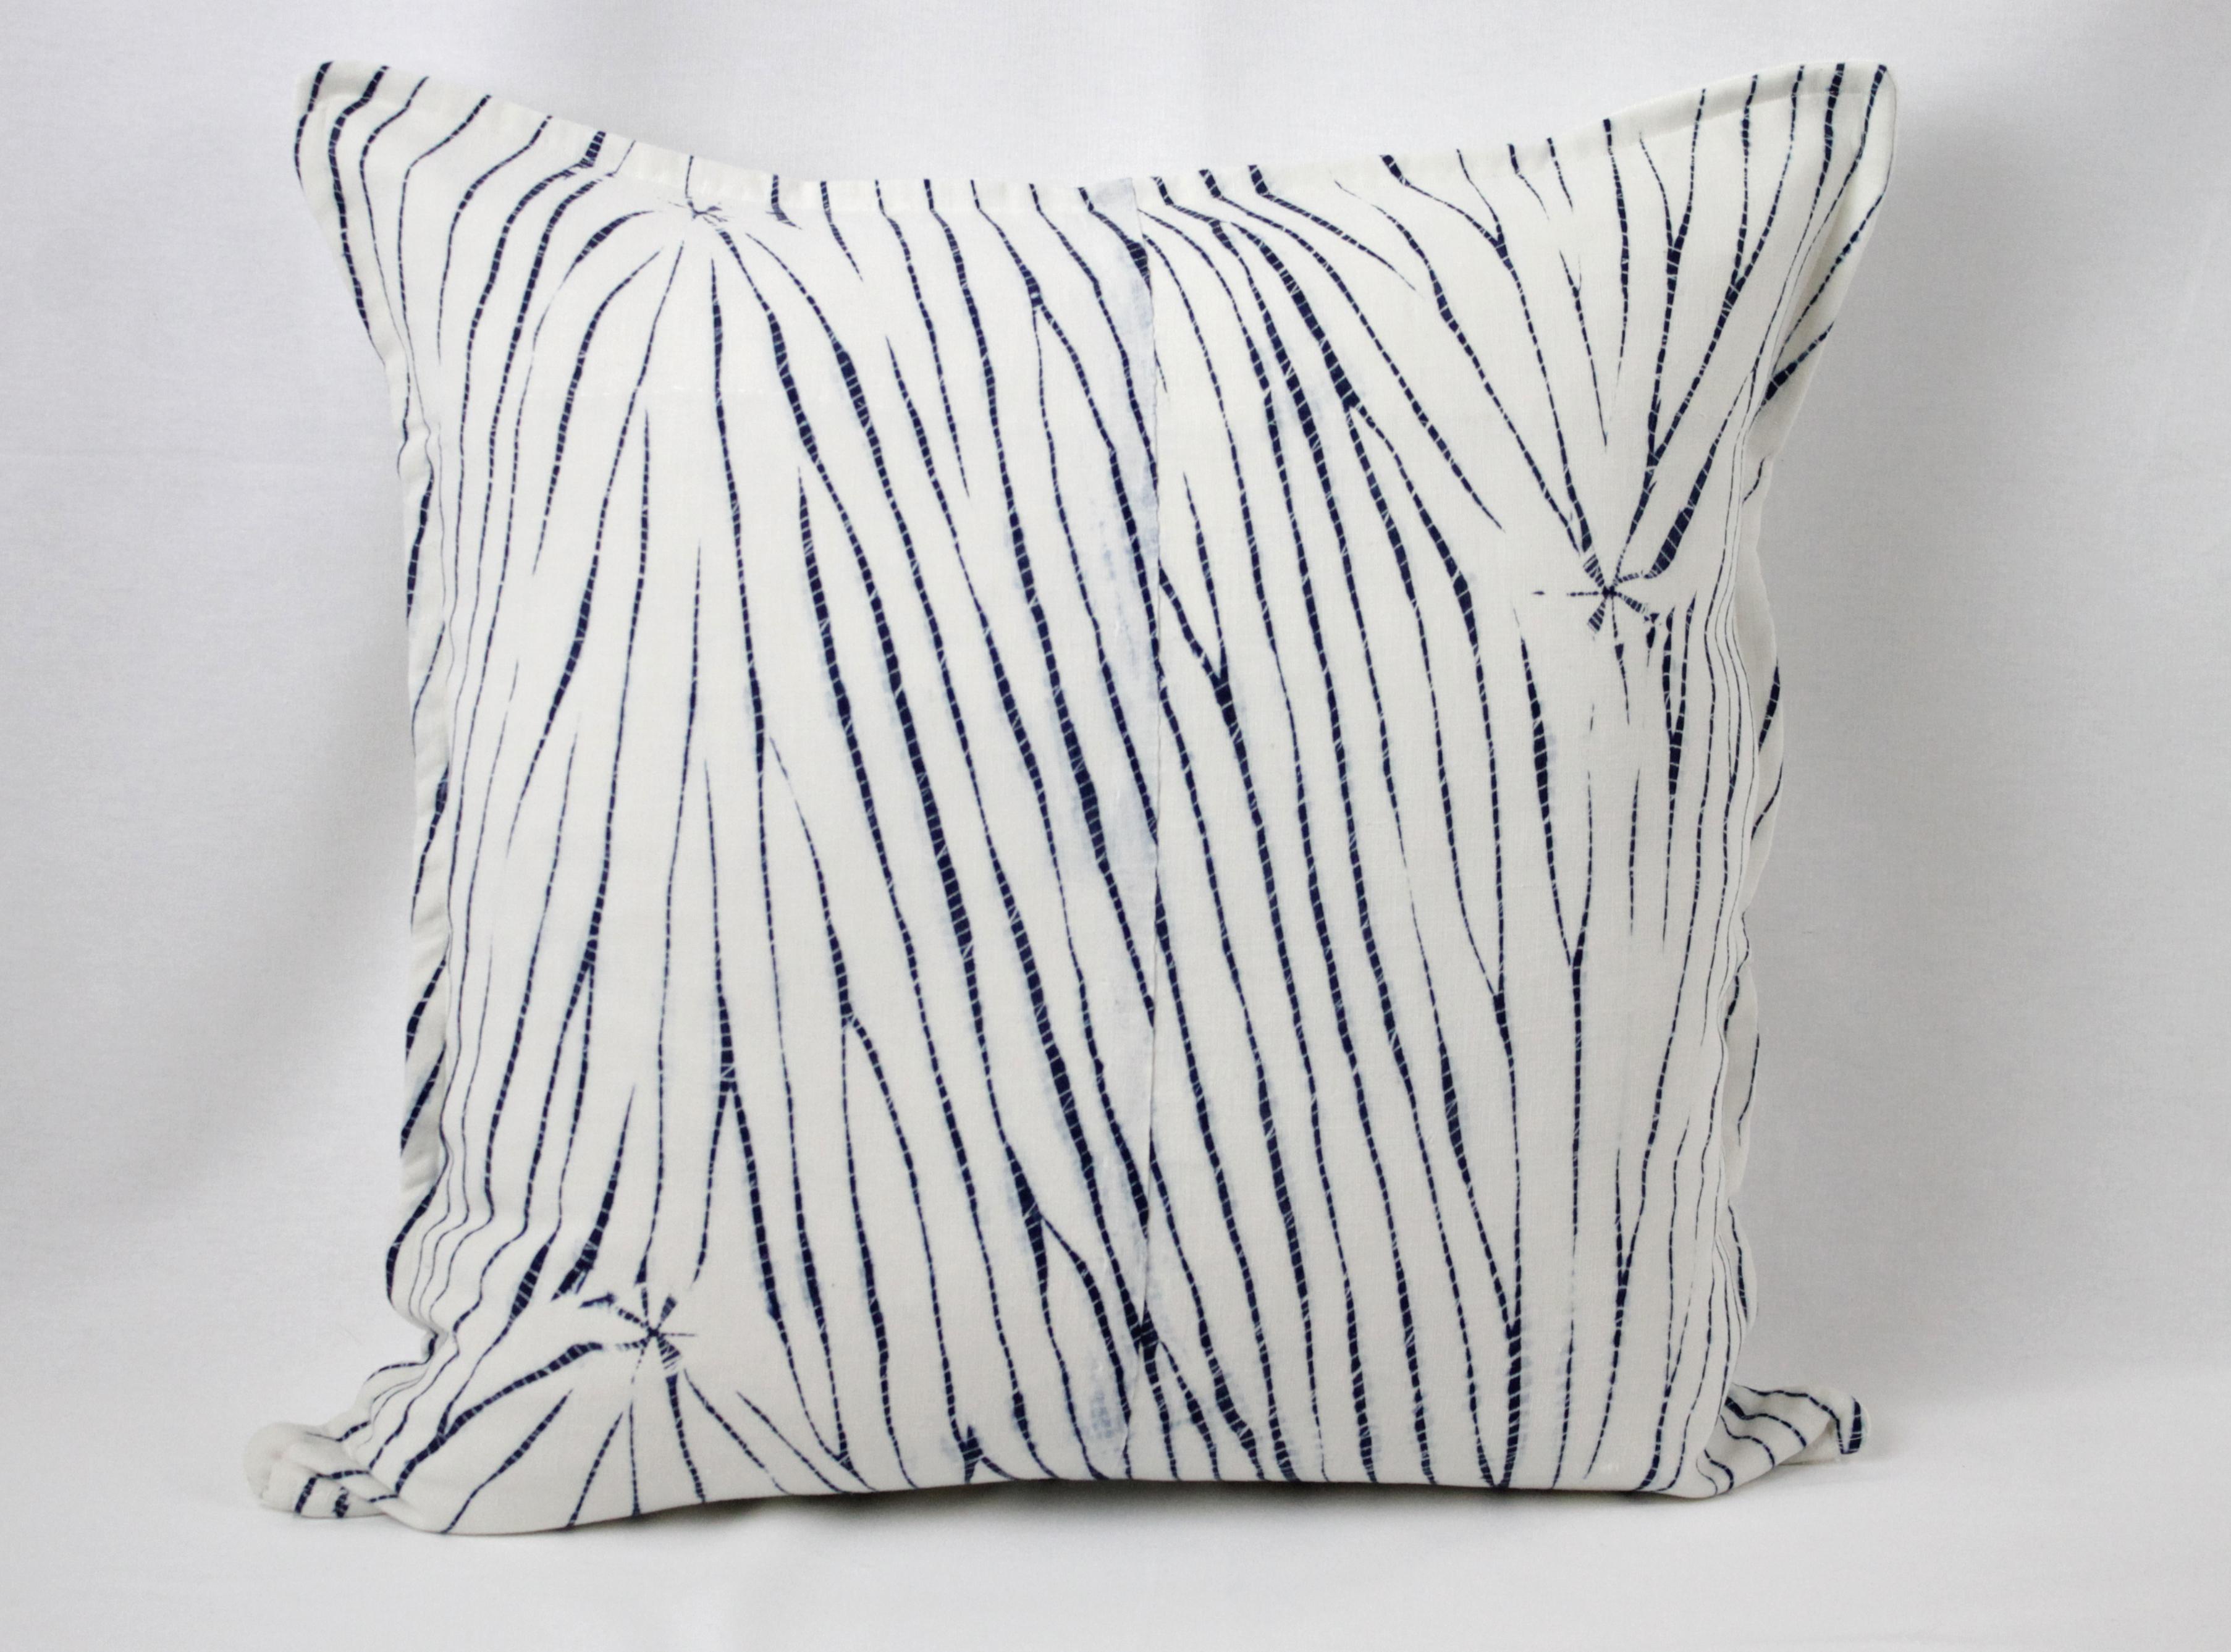 Vintage Shibori Dyed Textile Pillow with White Linen In Good Condition For Sale In Brea, CA